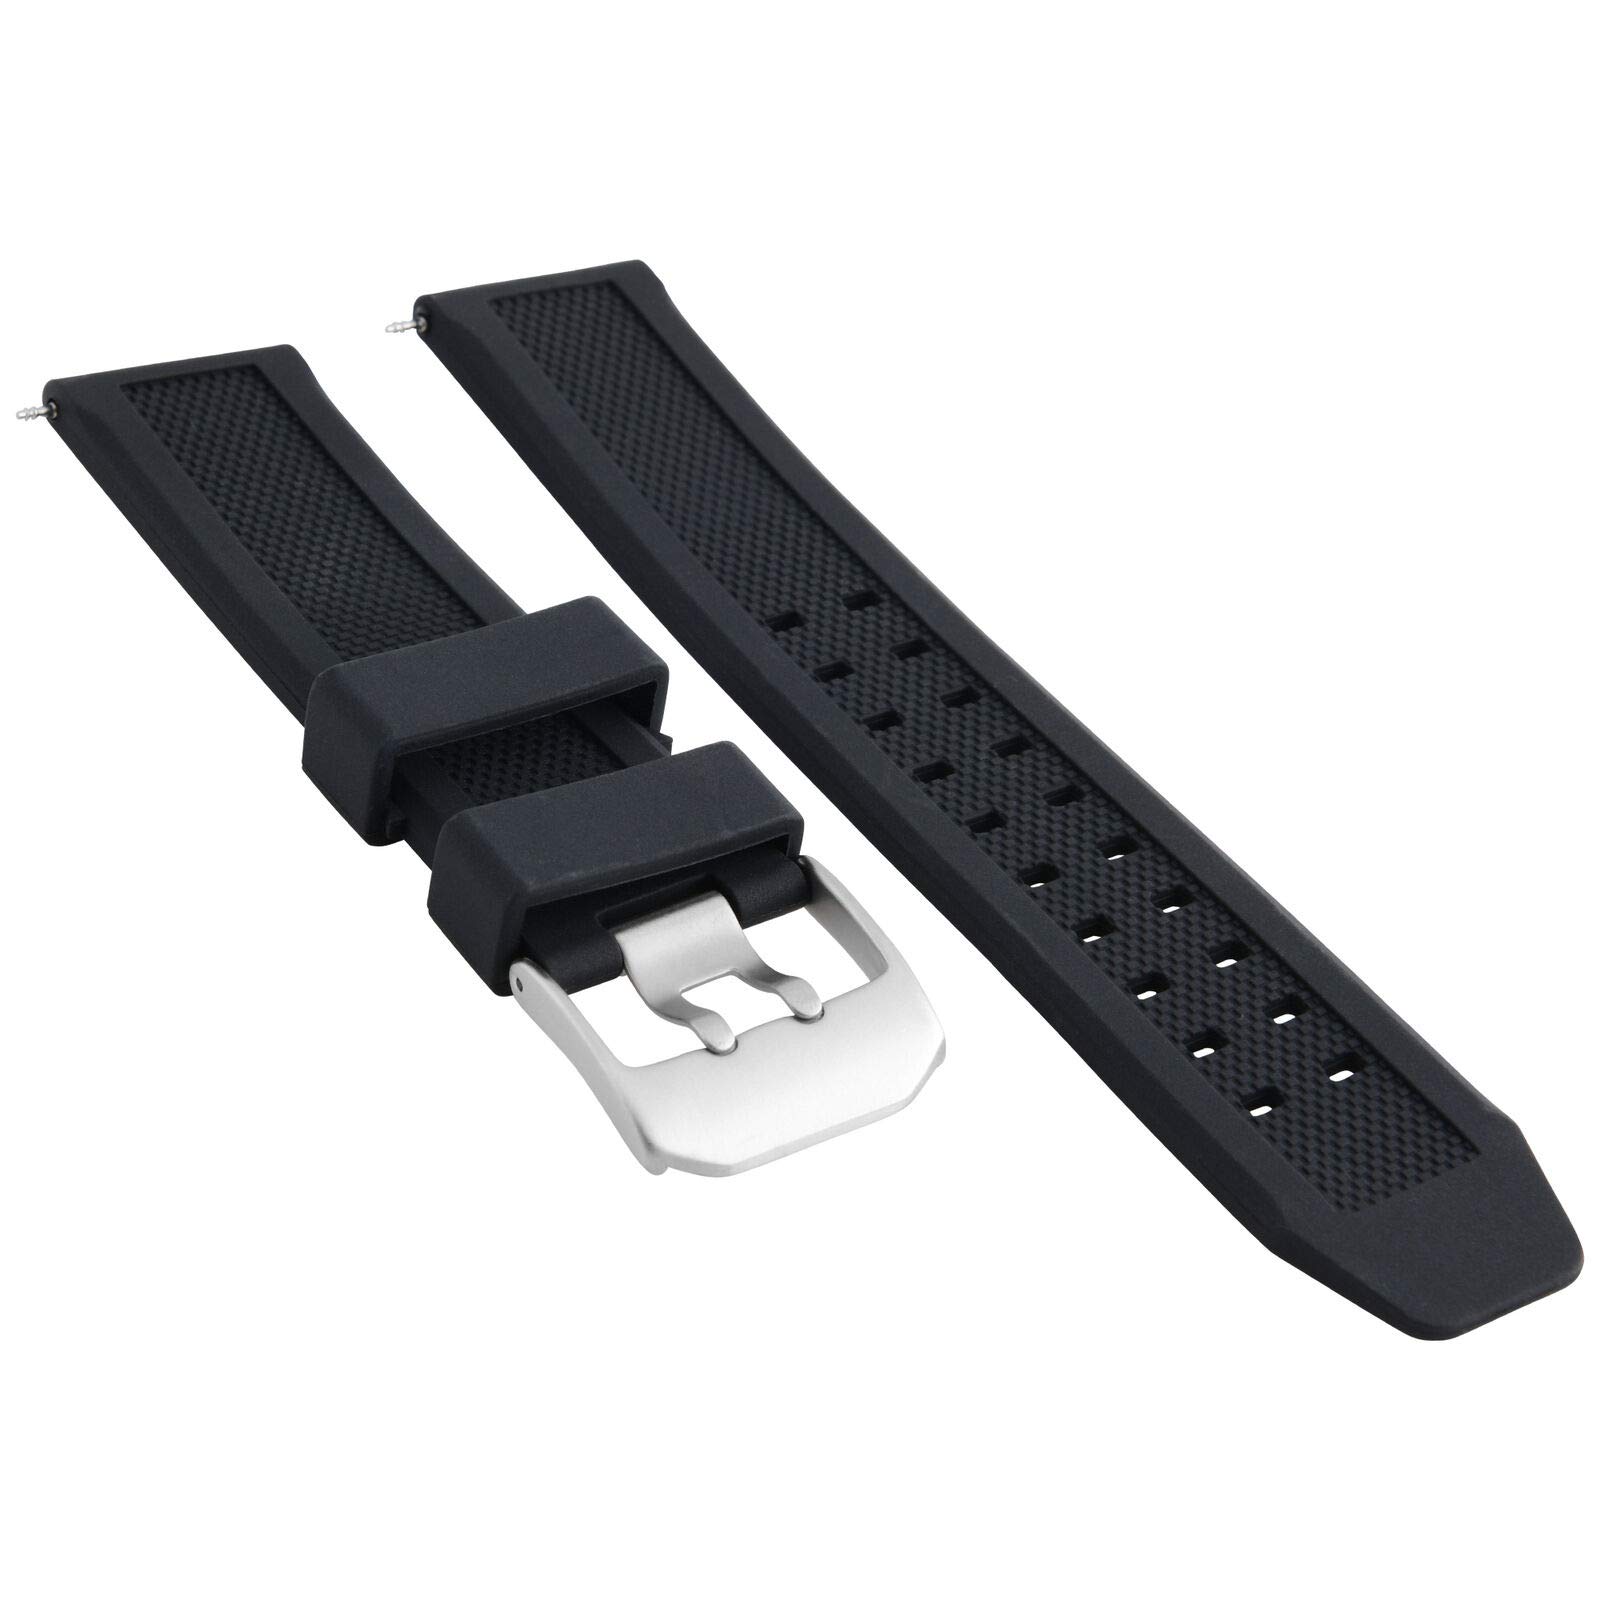 Ewatchparts 23MM RUBBER WATCH BAND STRAP COMPATIBLE WITH CITIZEN ECO DRIVE AT8020-03L BLACK H800-S081165